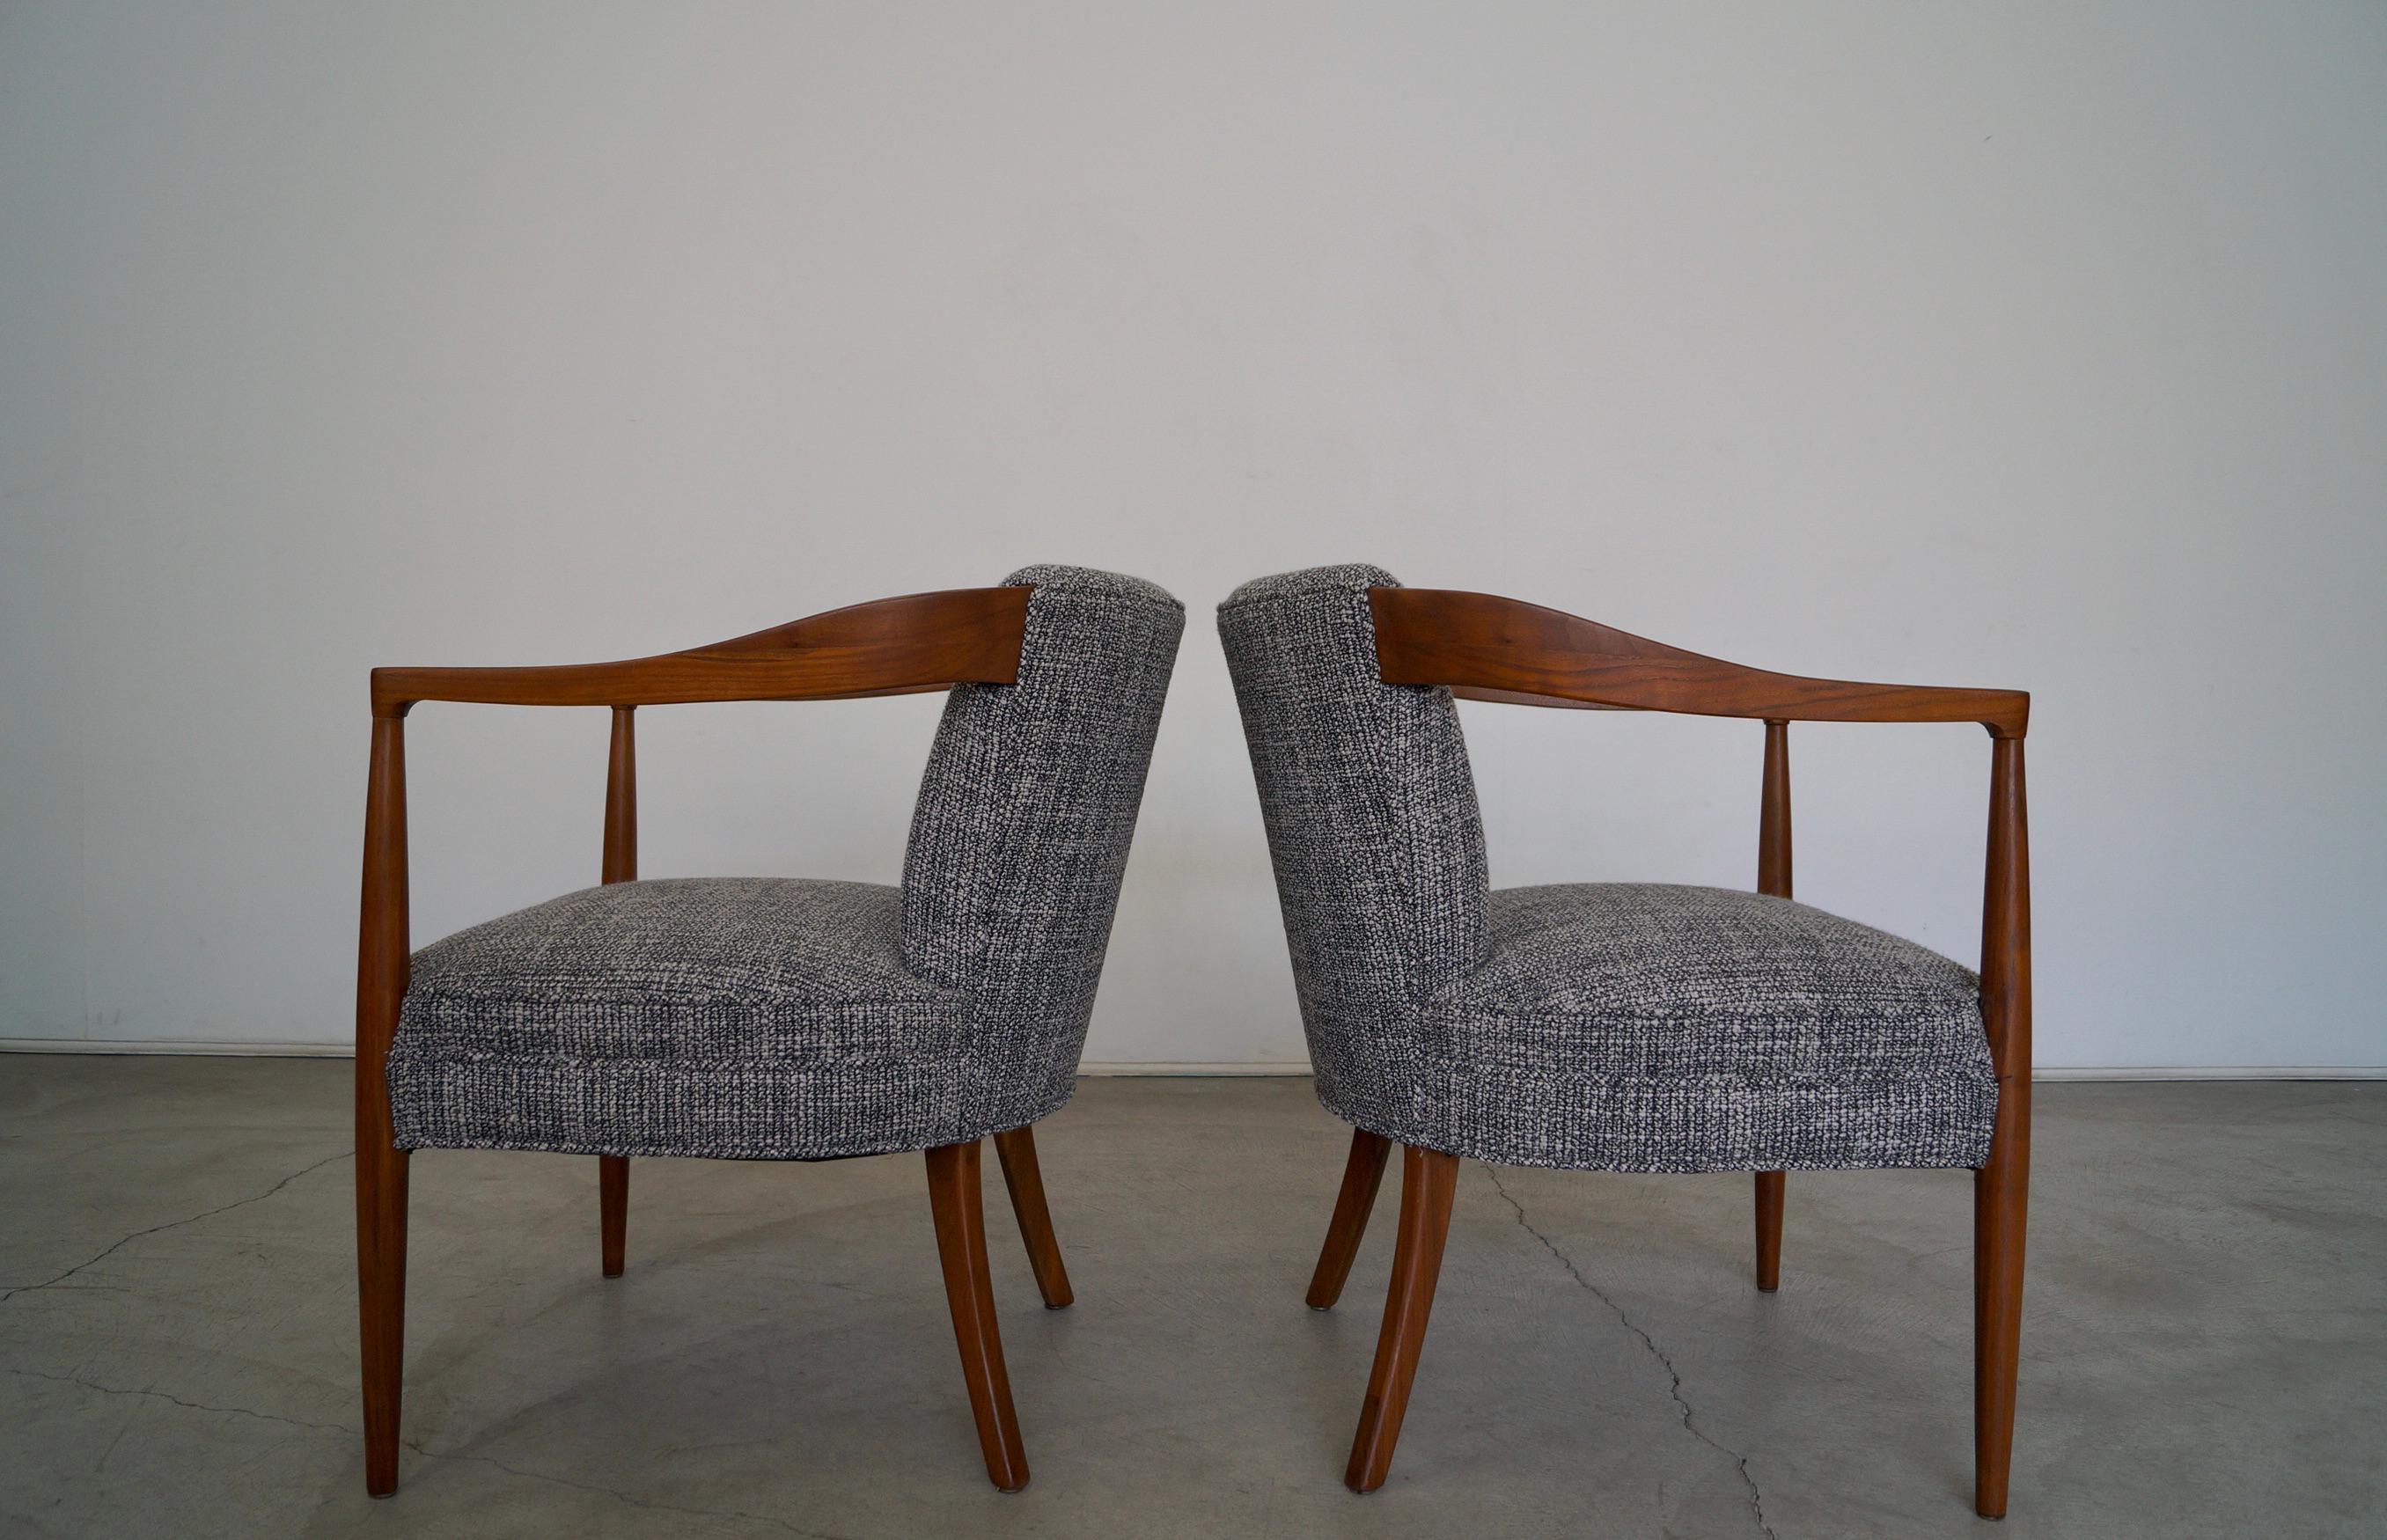 1950's Mid-Century Modern Walnut Armchairs, a Pair In Excellent Condition For Sale In Burbank, CA